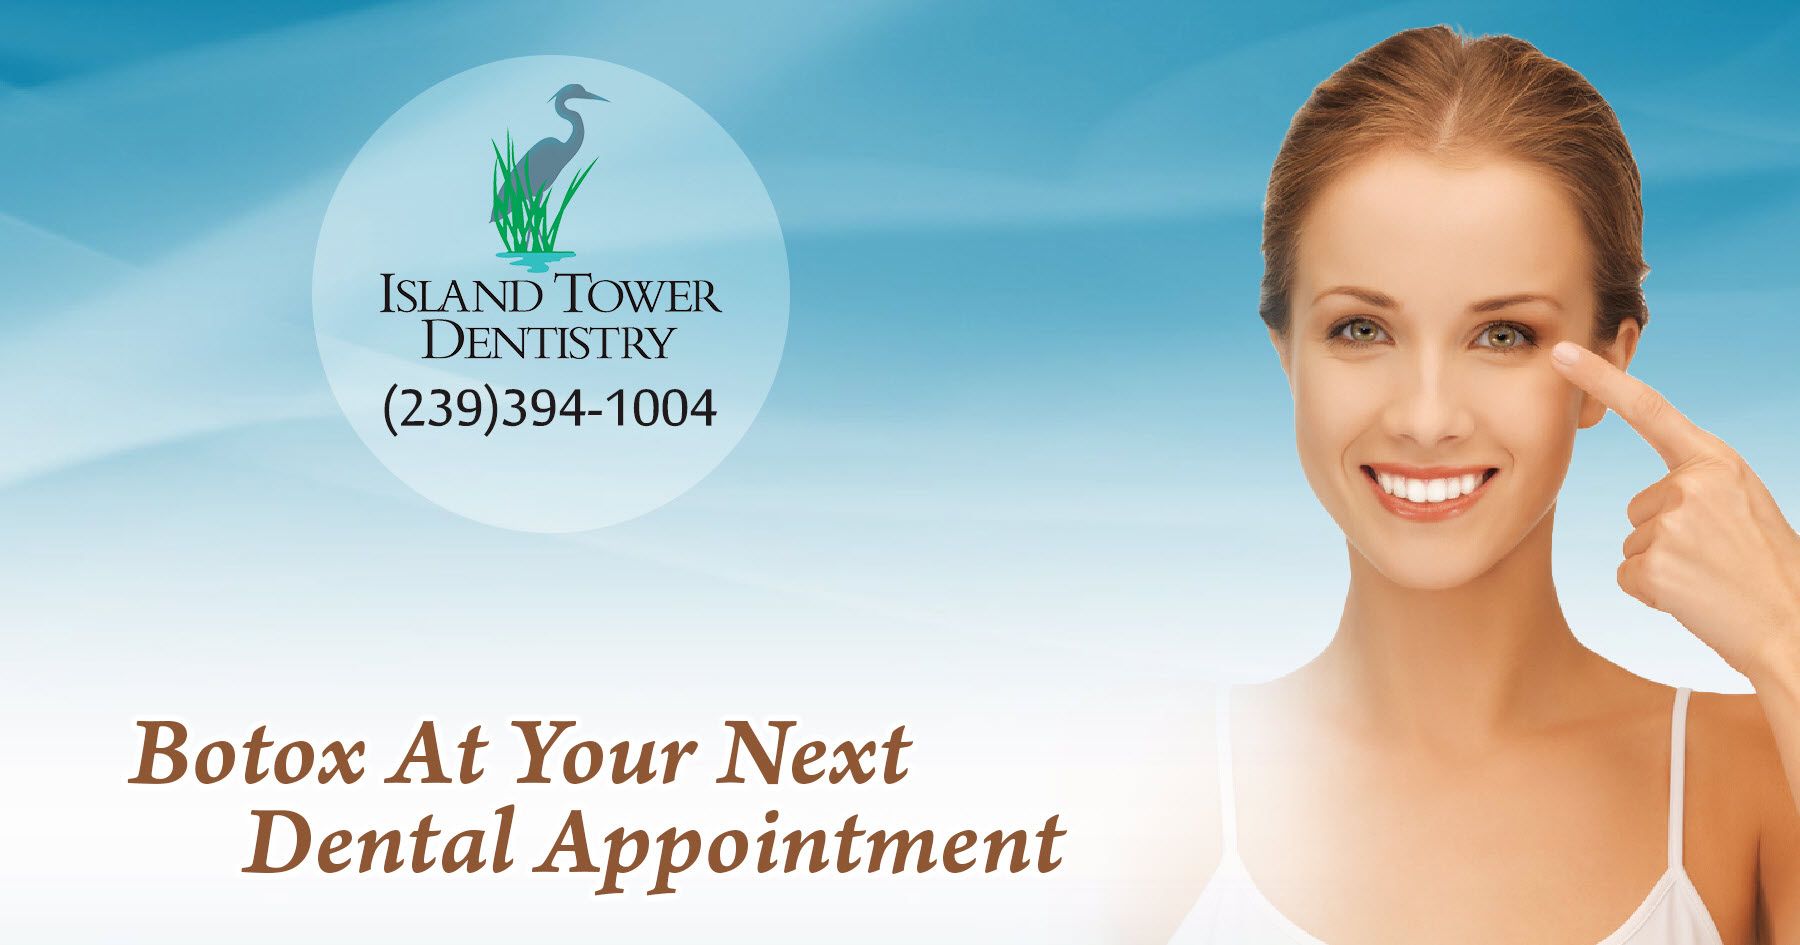 Island Tower Dentistry in Marco Island offers Botox along with other cosmetic dental treatments